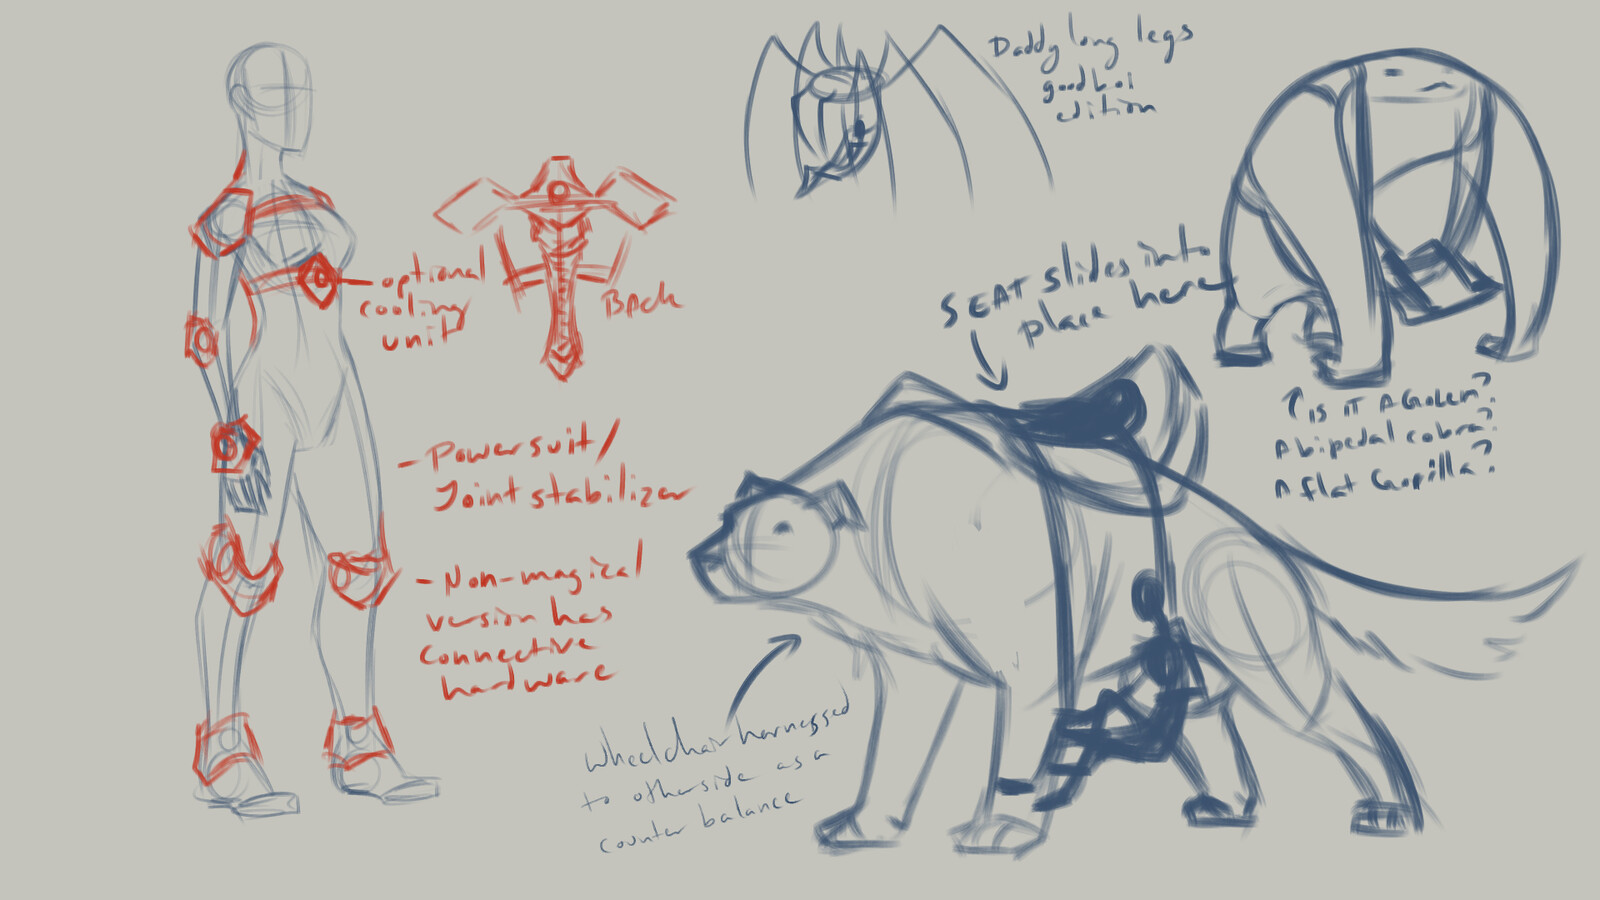 Concept sketches from a disability assistance/mobility brainstorm with disabled fans of the comic